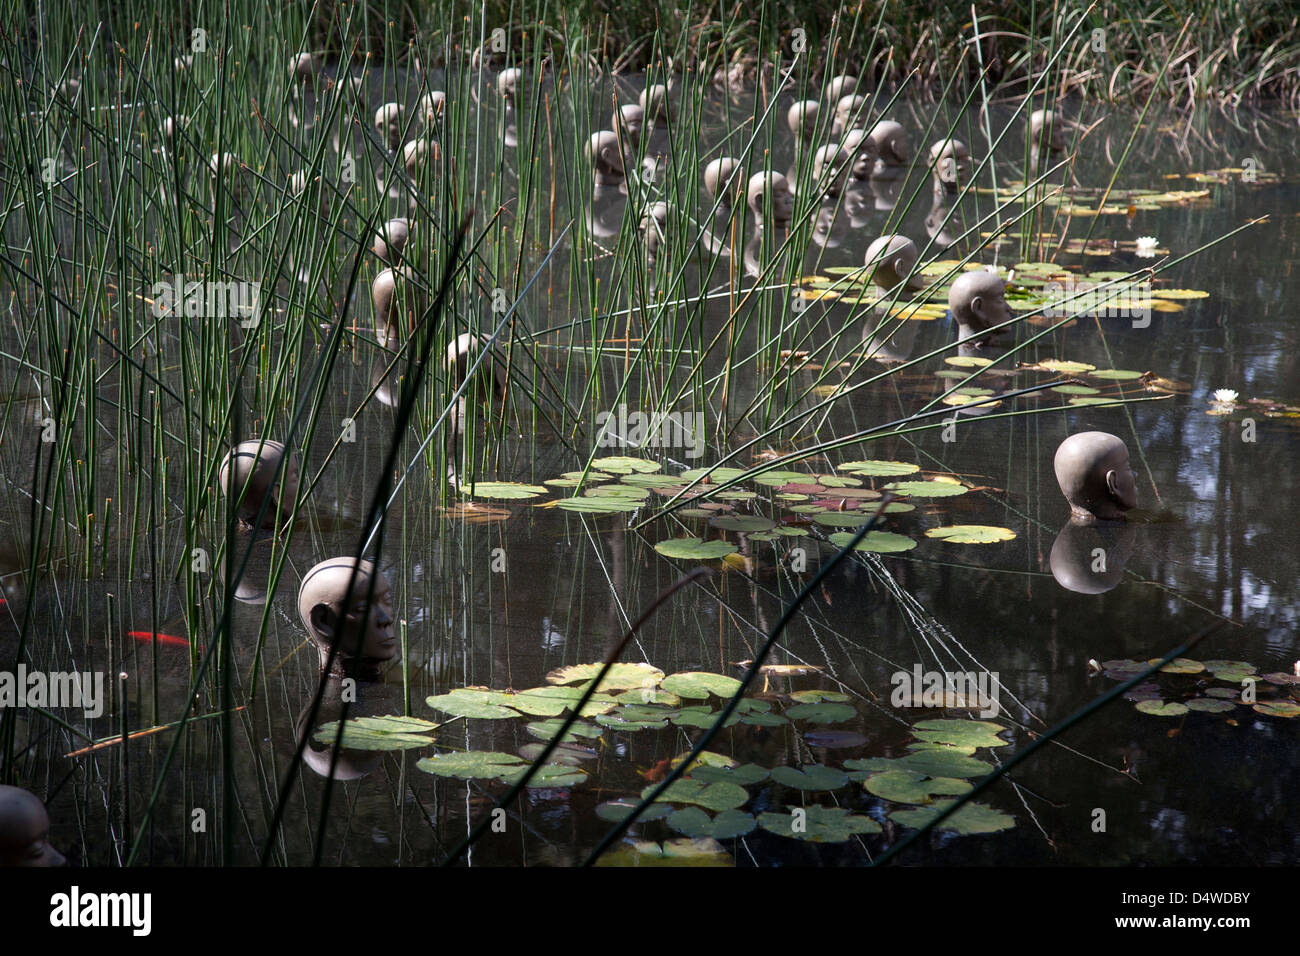 The Marsh Pond part of the Sculpture Garden at The National Art Gallery of Australia Stock Photo